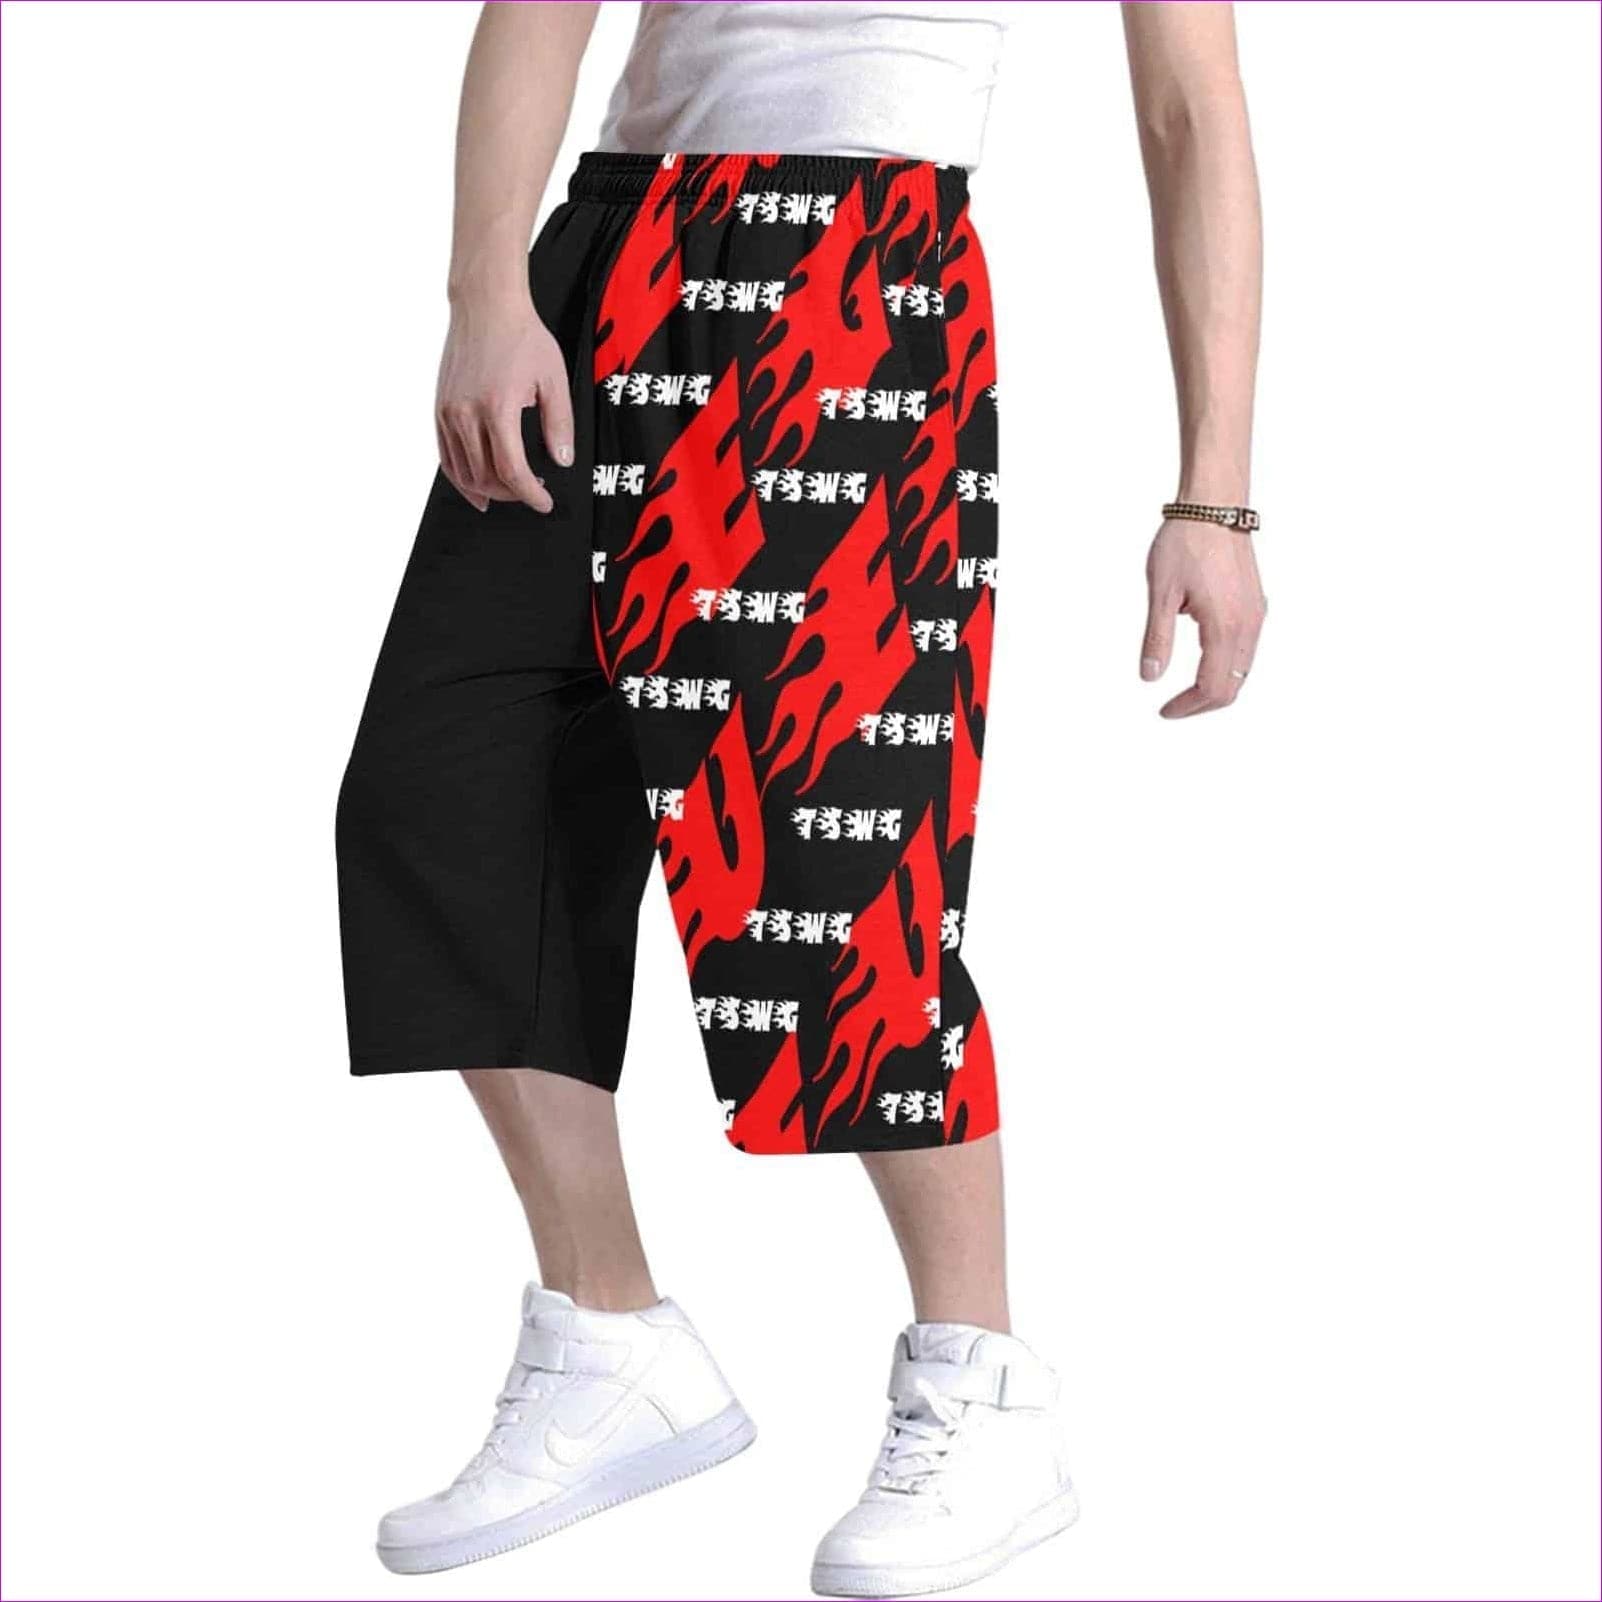 TSWG Fuego Flame Men's All Over Print Baggy Shorts (Model L37) - TSWG Fuego Flame Baggy Shorts for Men - Red - 2 styles - mens shorts at TFC&H Co.